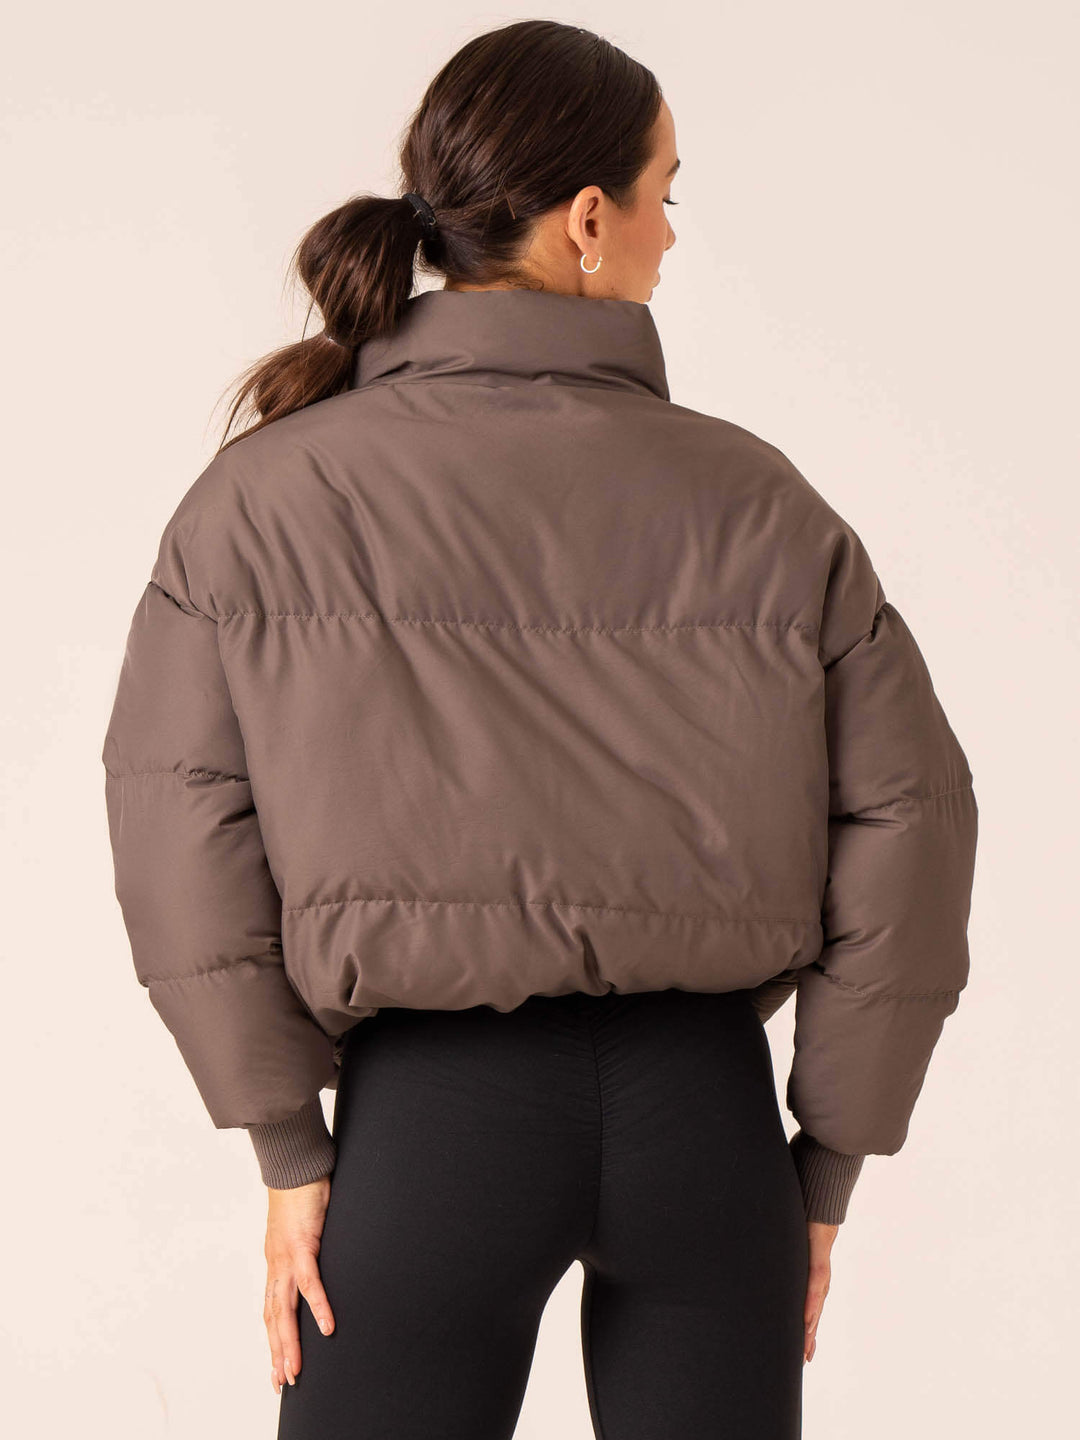 Pace Puffer Jacket - Taupe Clothing Ryderwear 